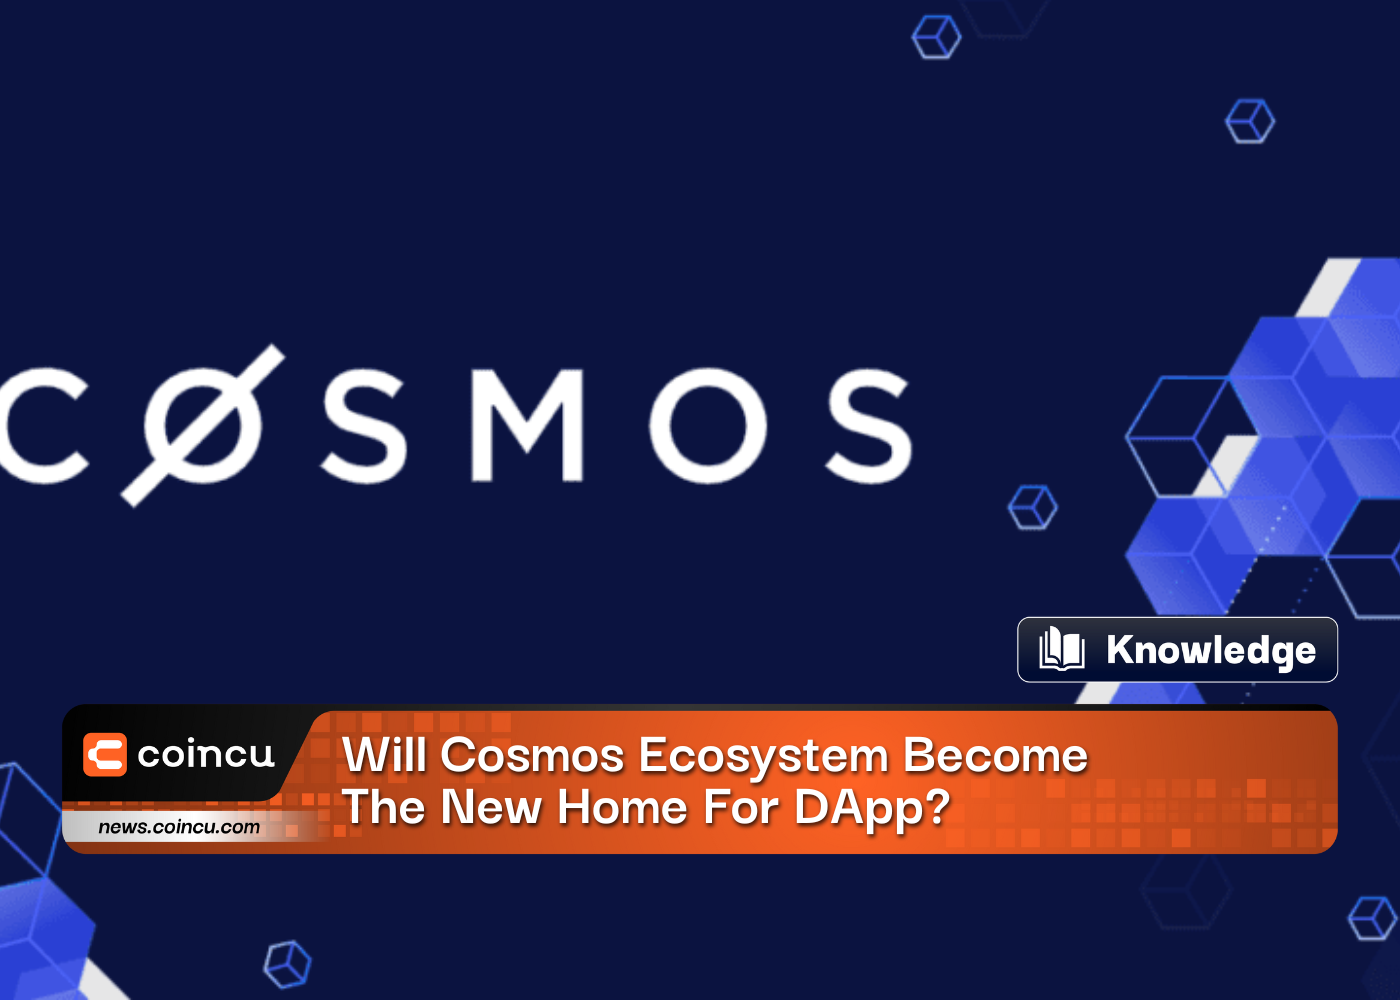 Will Cosmos Ecosystem Become The New Home For DApp?